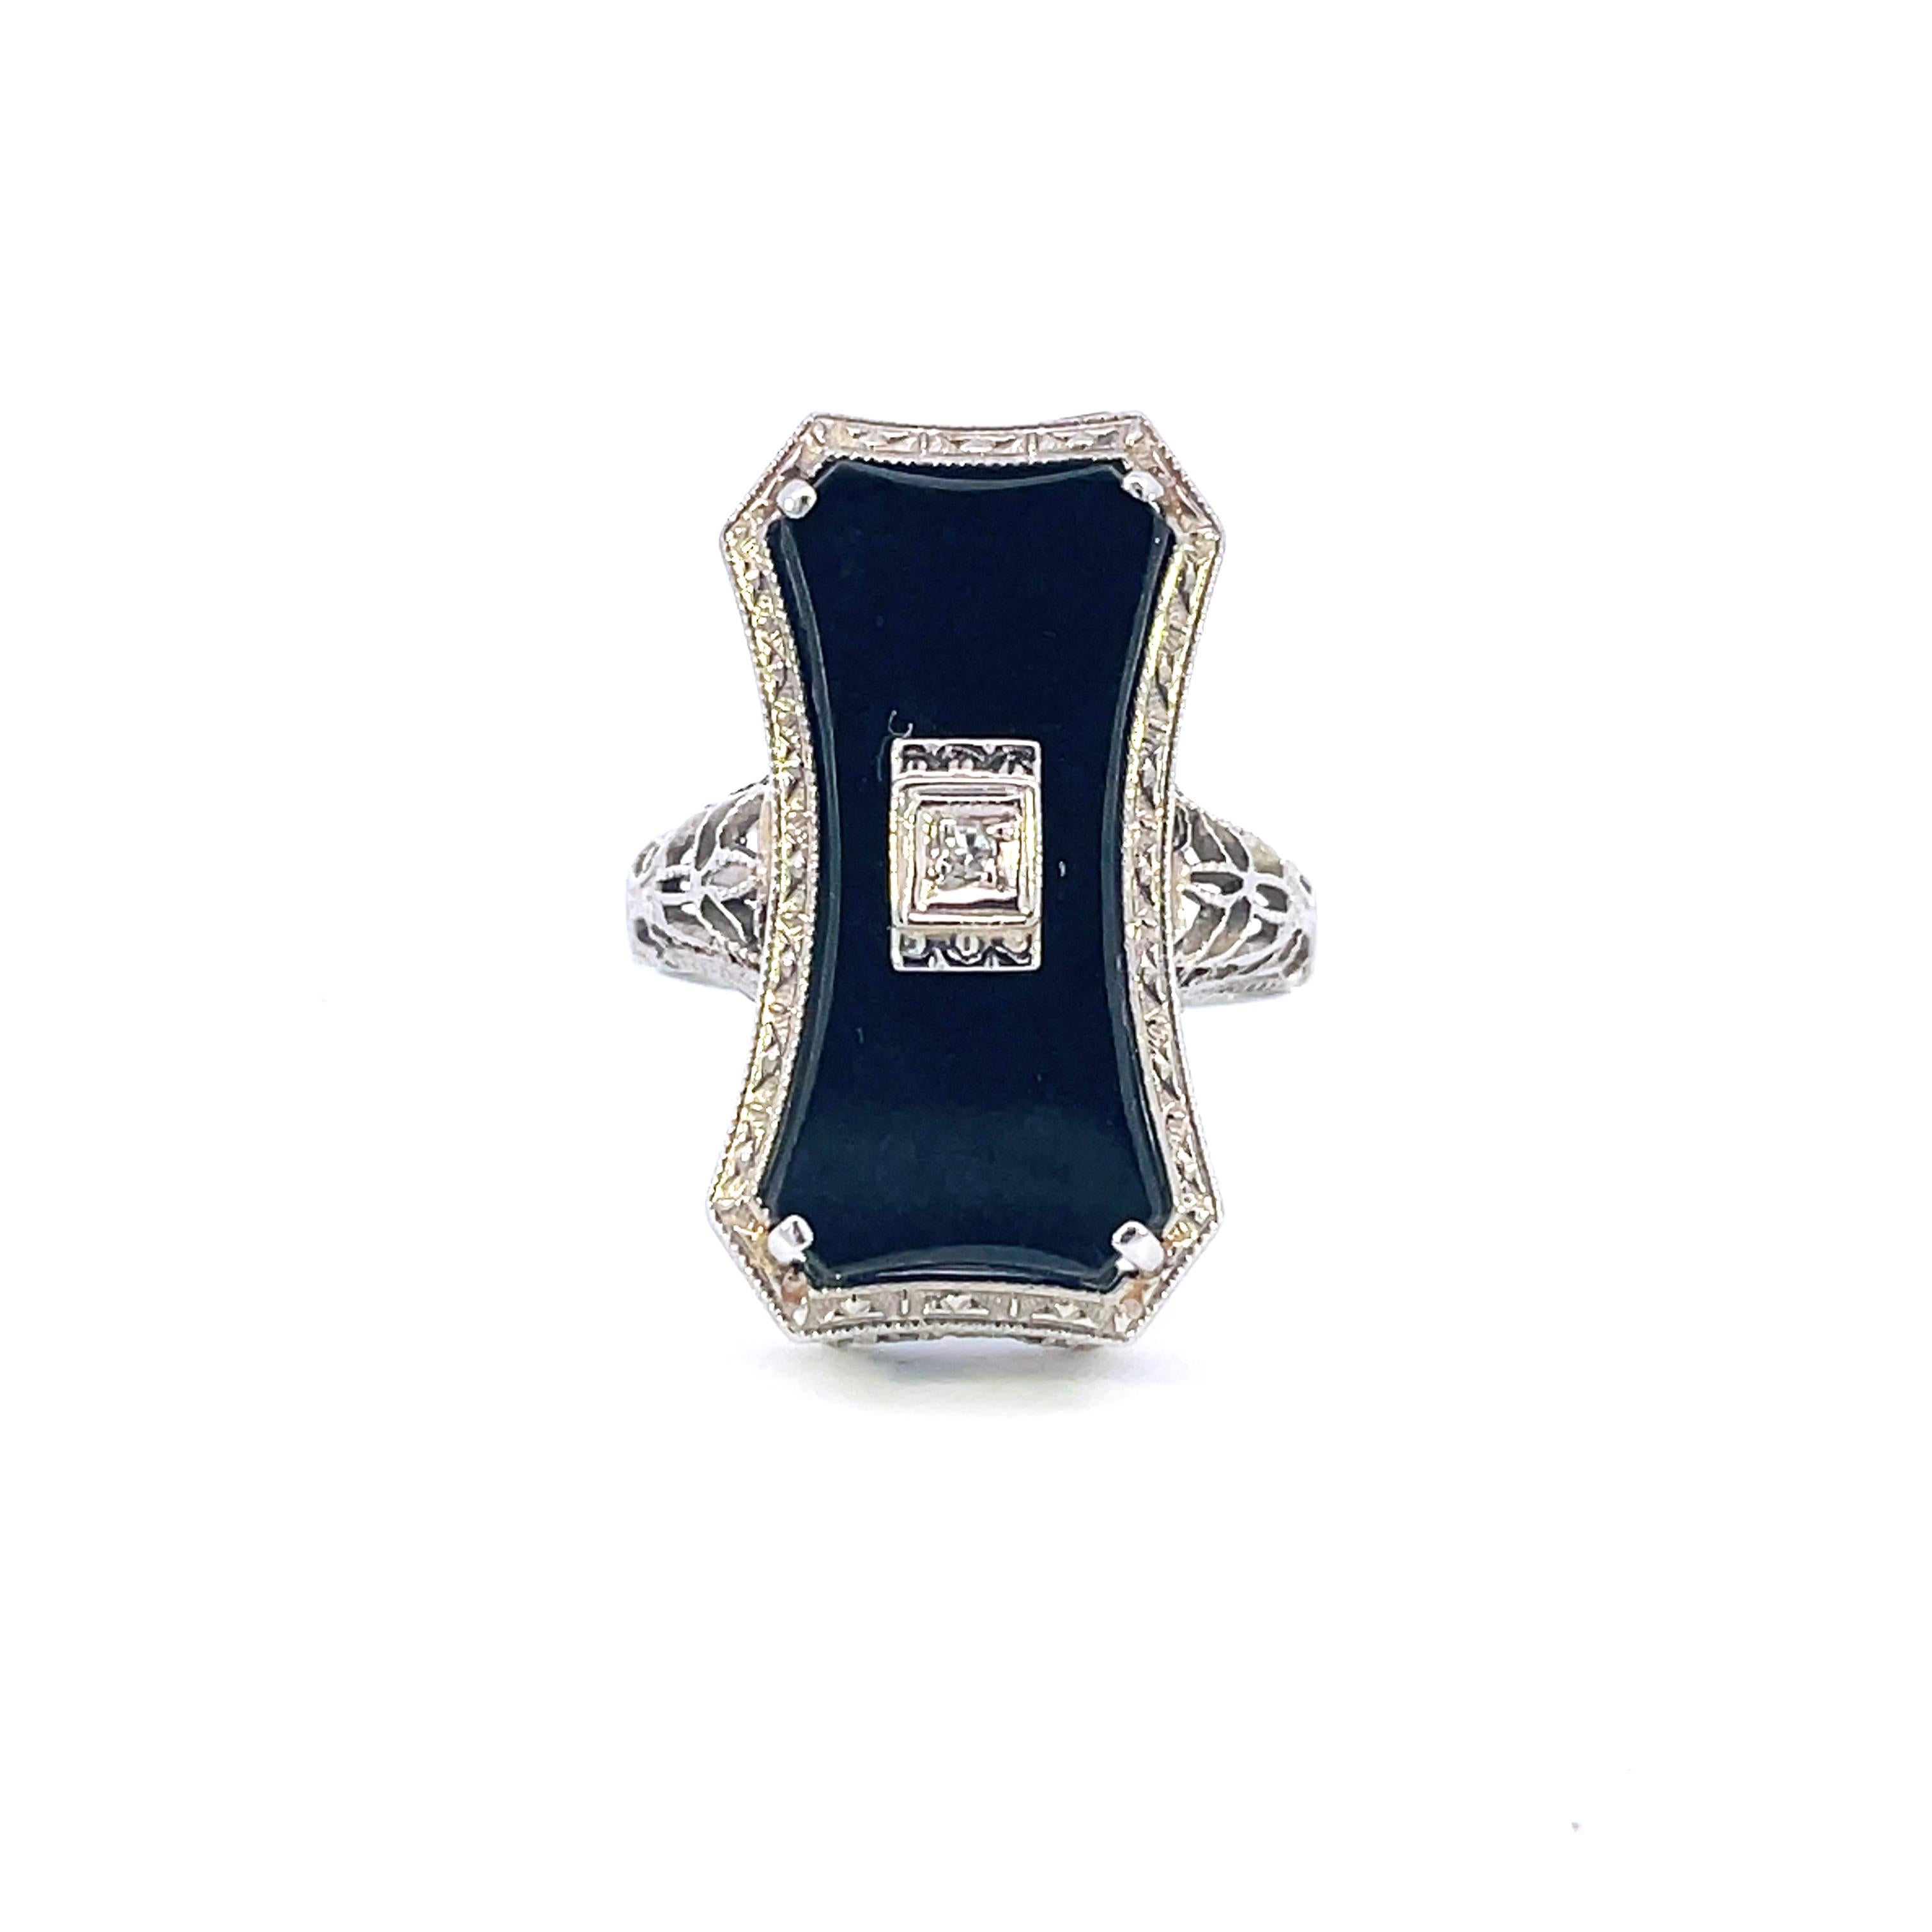 This is a unique Art Deco ring crafted in 14K white gold that showcases a beautiful Black Jade tablet adorned with a white diamond at the center. Delightfully Deco, the ring has marvelous and fanciful filigree along the shoulders and framing the